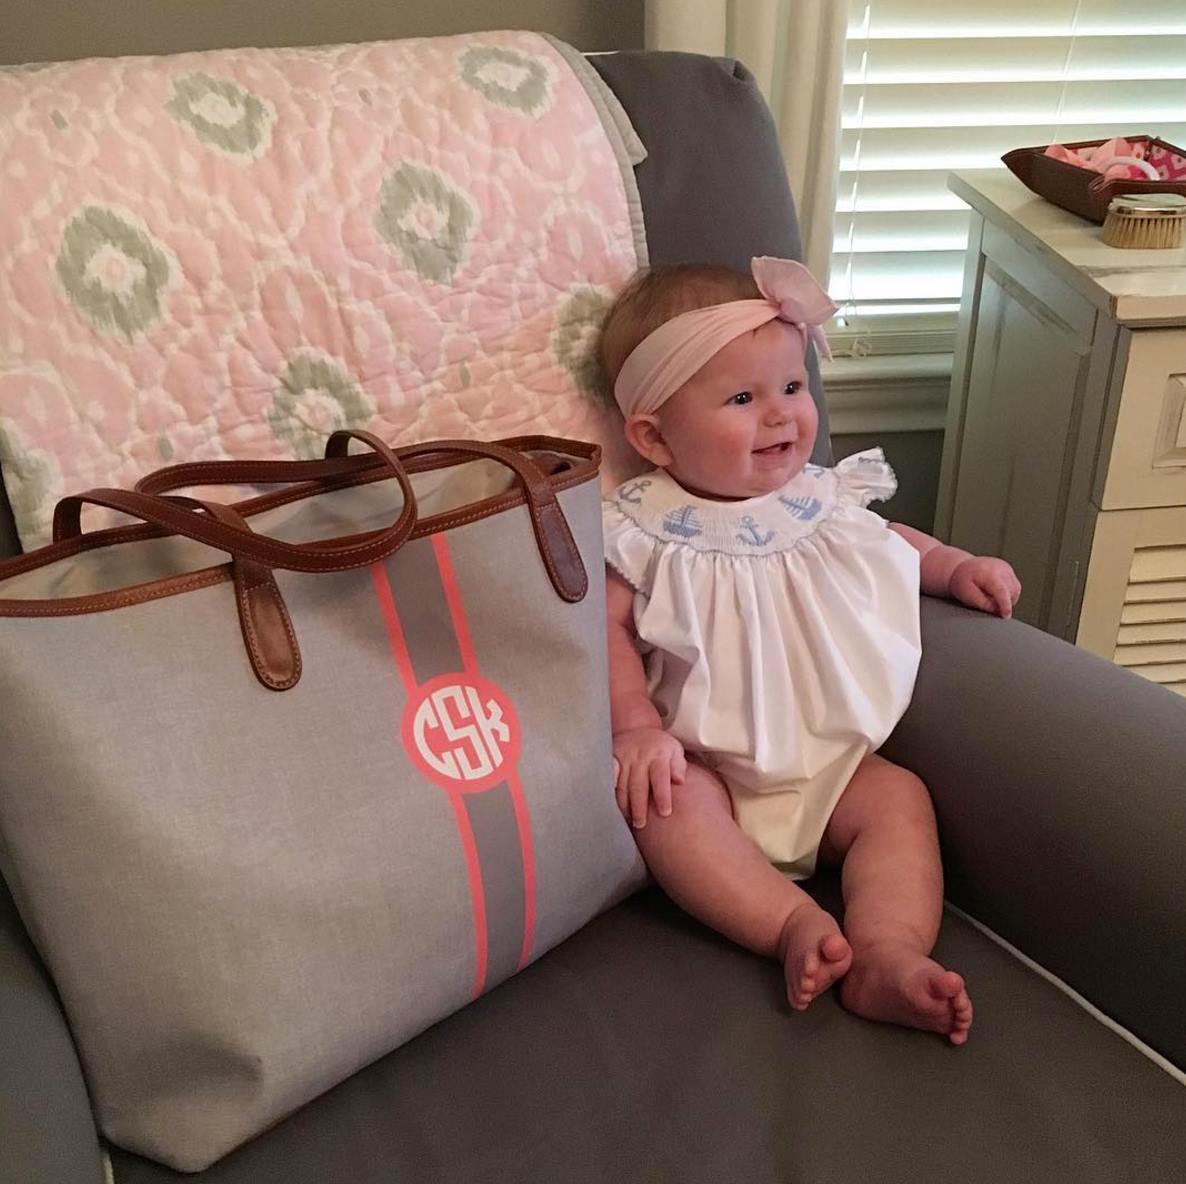 Charming monogrammed charcoal diaper bag, perfect for stylish parents on the go